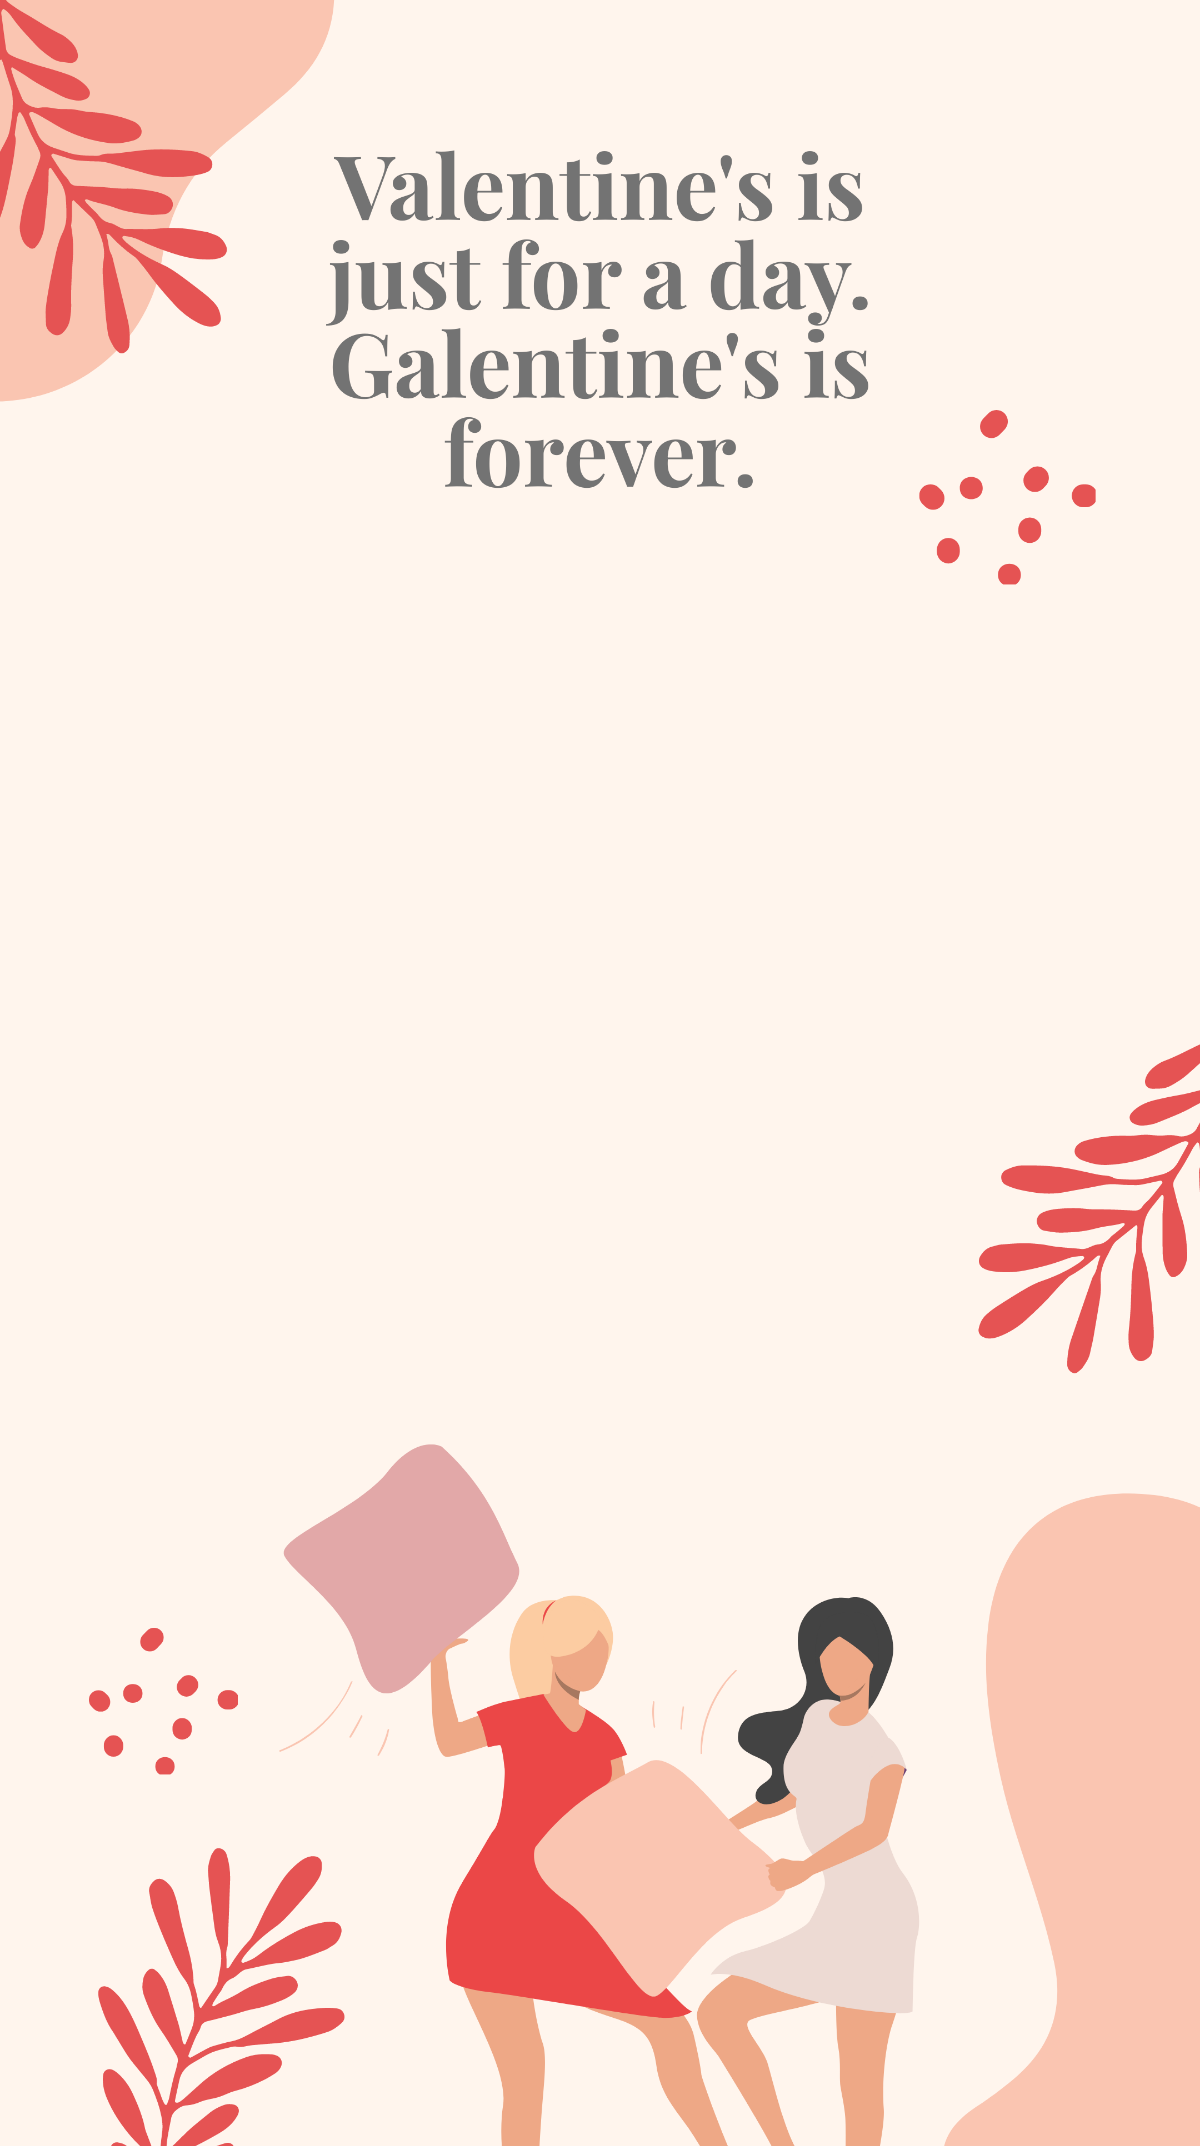 Funny Galentines Day Snapchat Geofilter